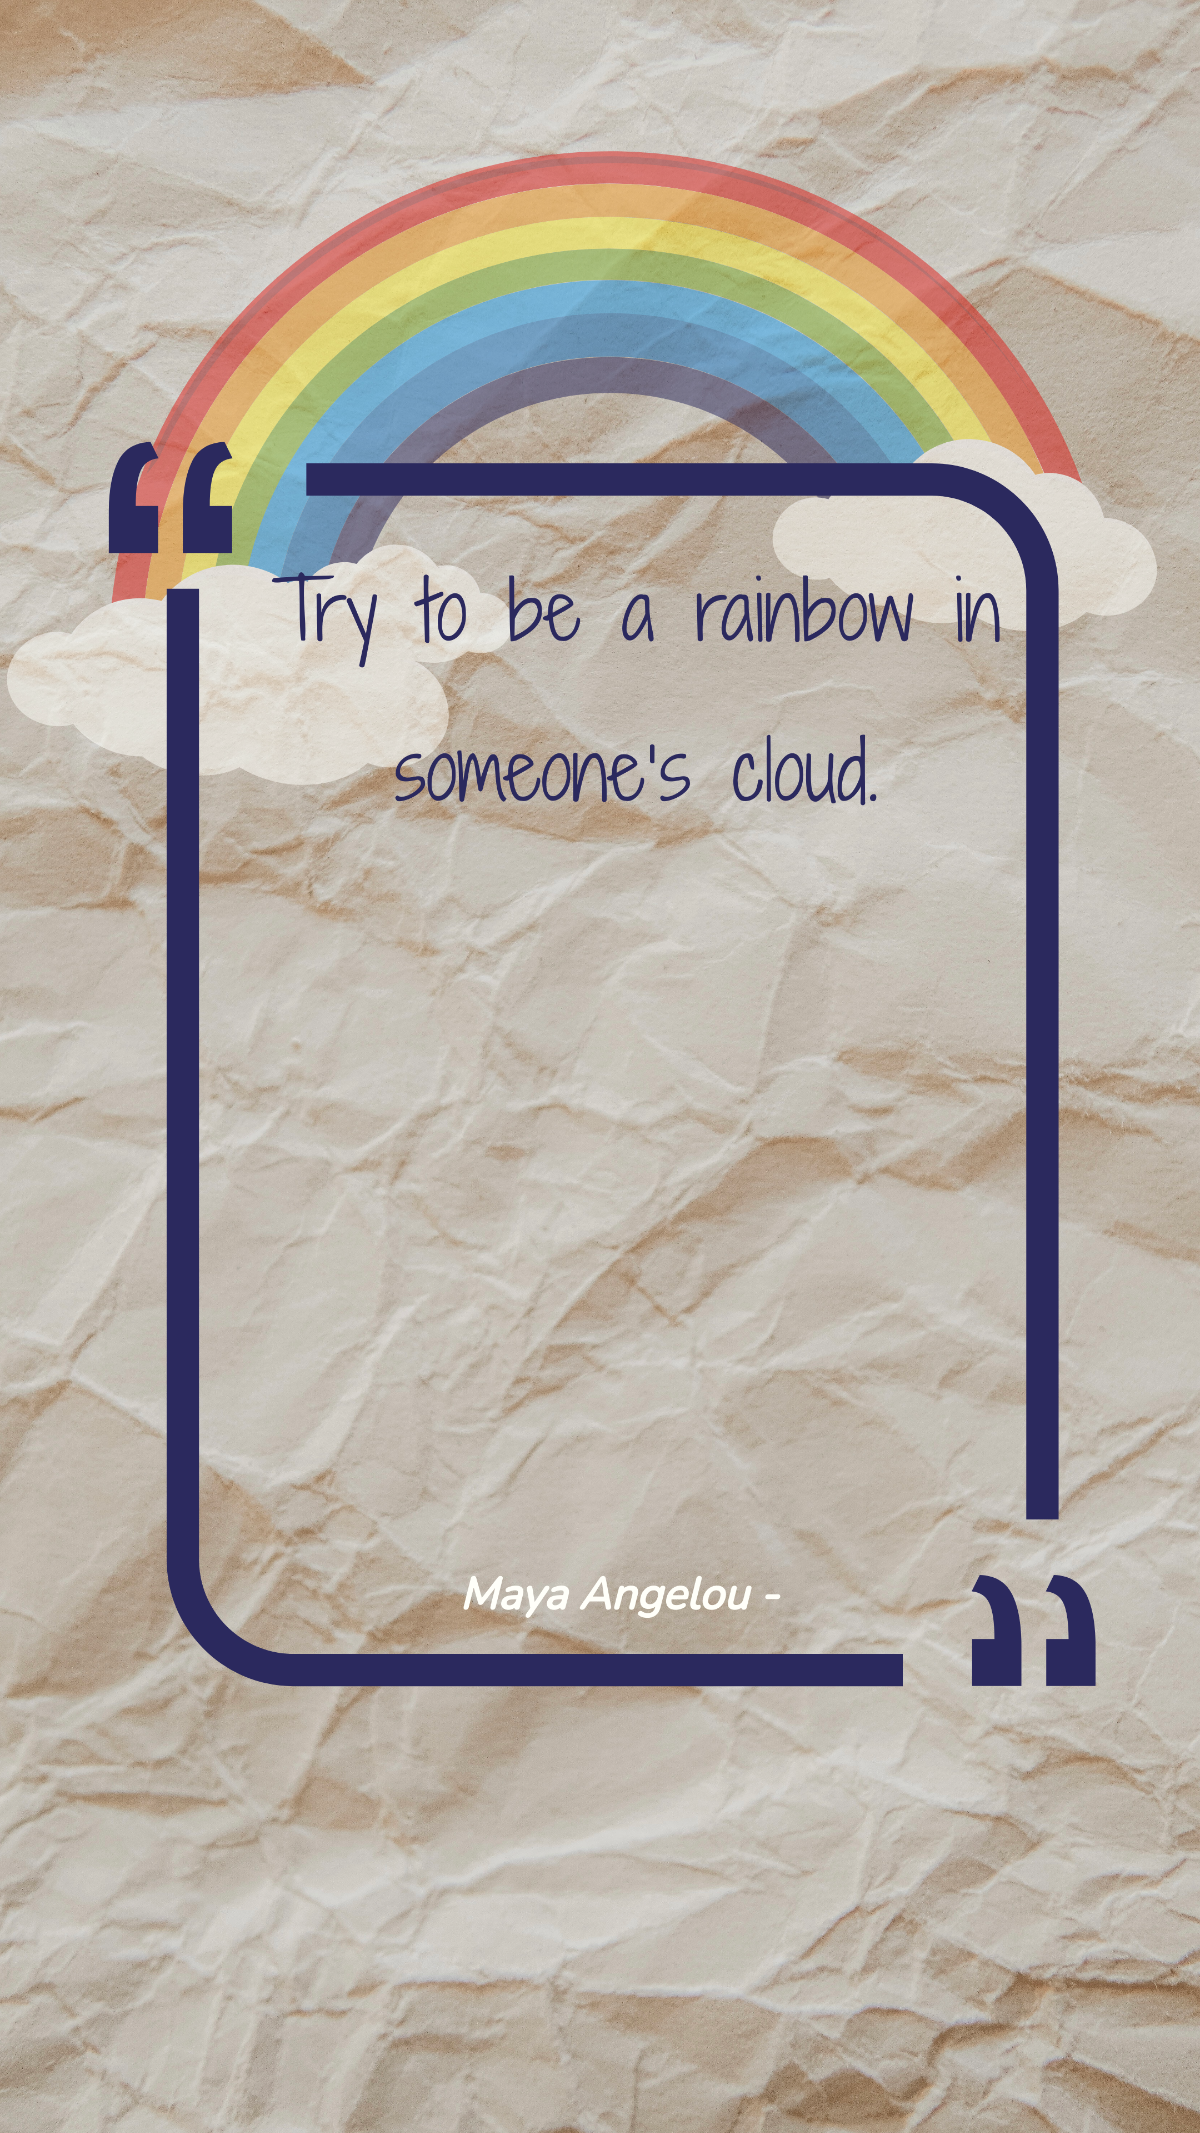 Maya Angelou - Try to be a rainbow in someone’s cloud. Template